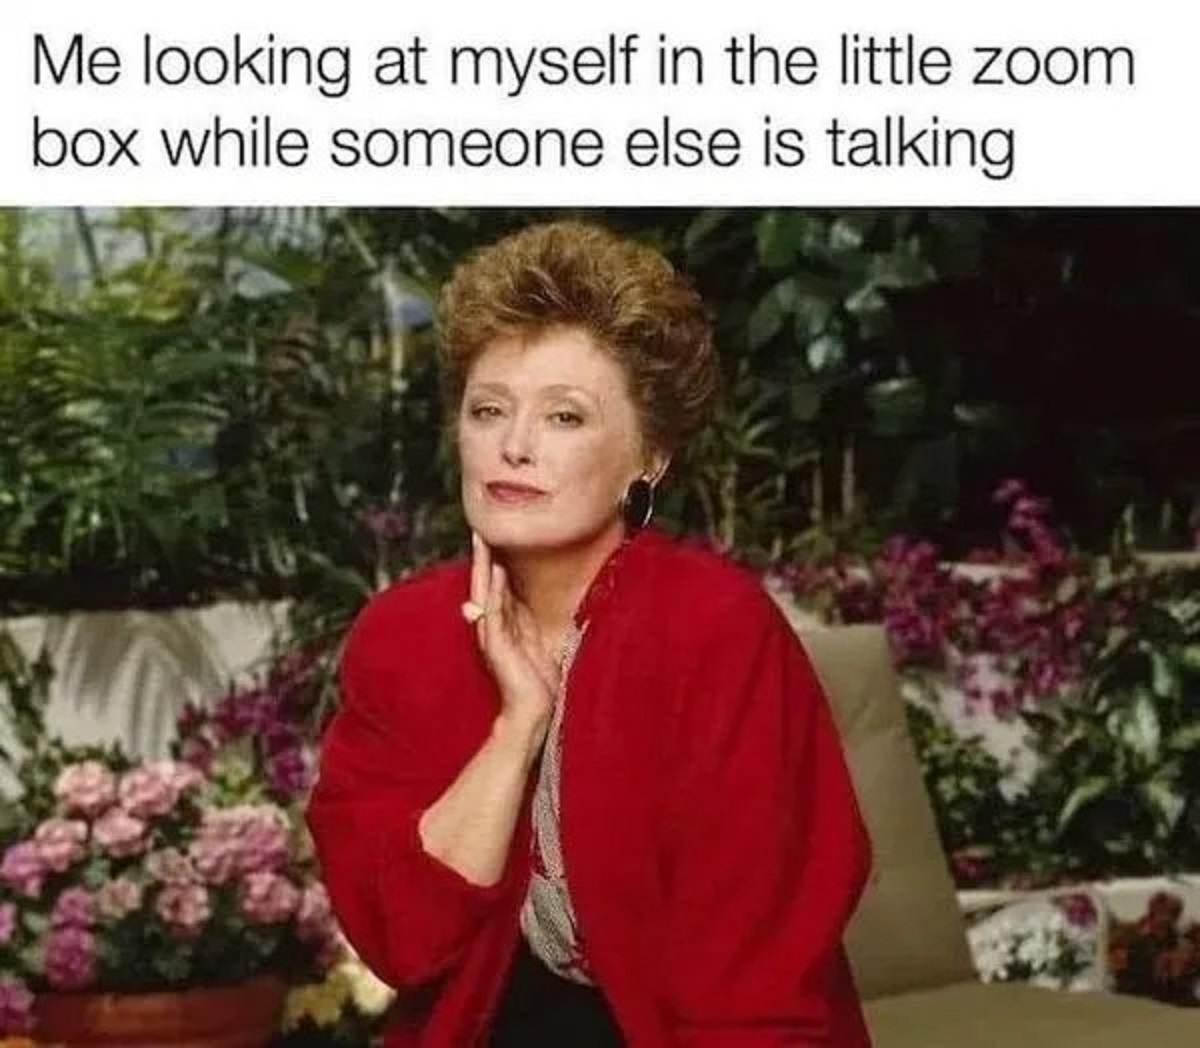 blanche devereaux - Me looking at myself in the little zoom box while someone else is talking